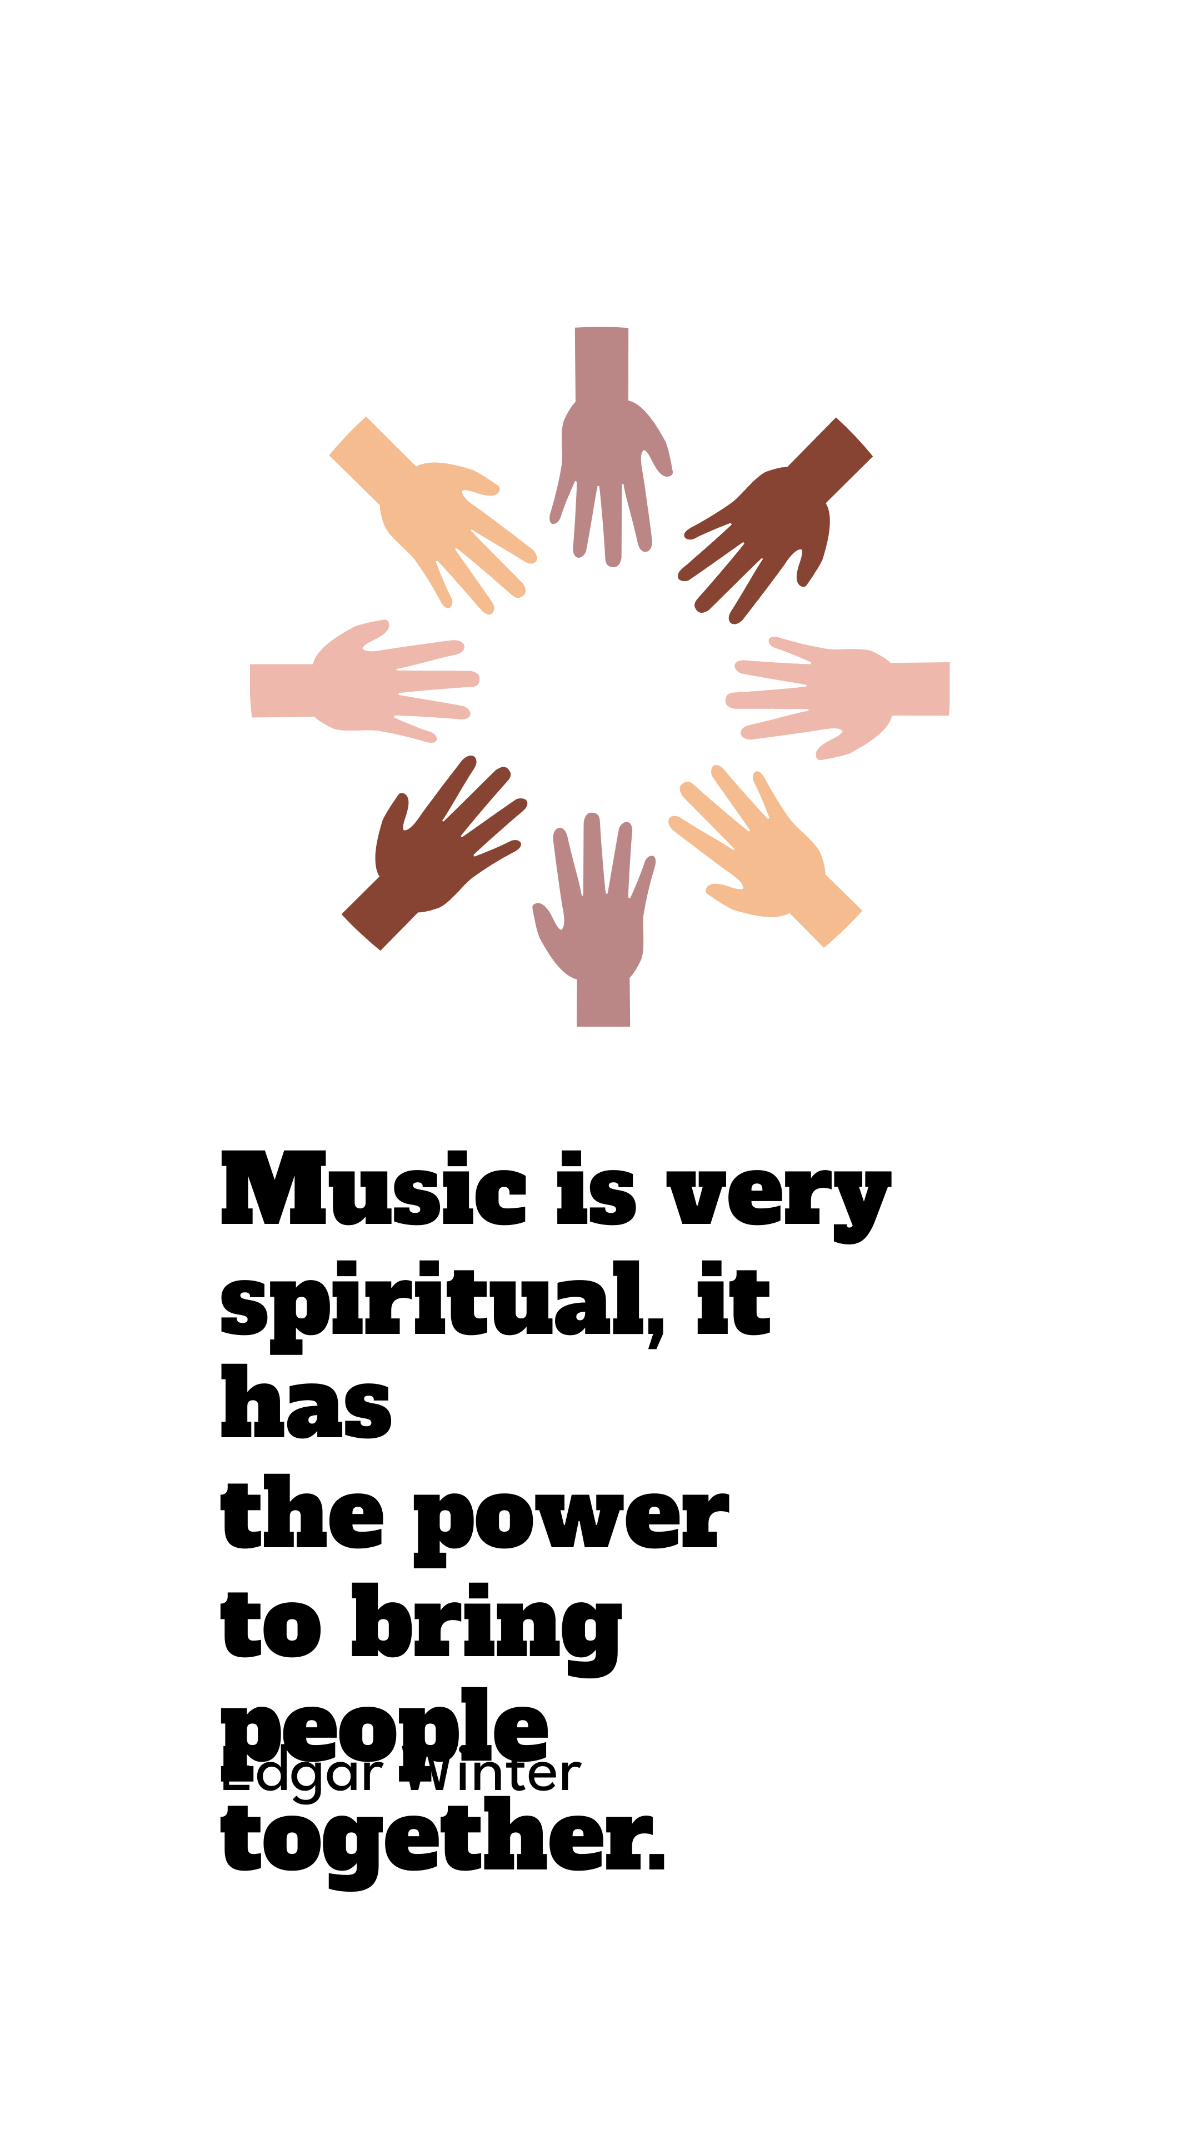 Edgar Winter - Music is very spiritual, it has the power to bring people together. Template